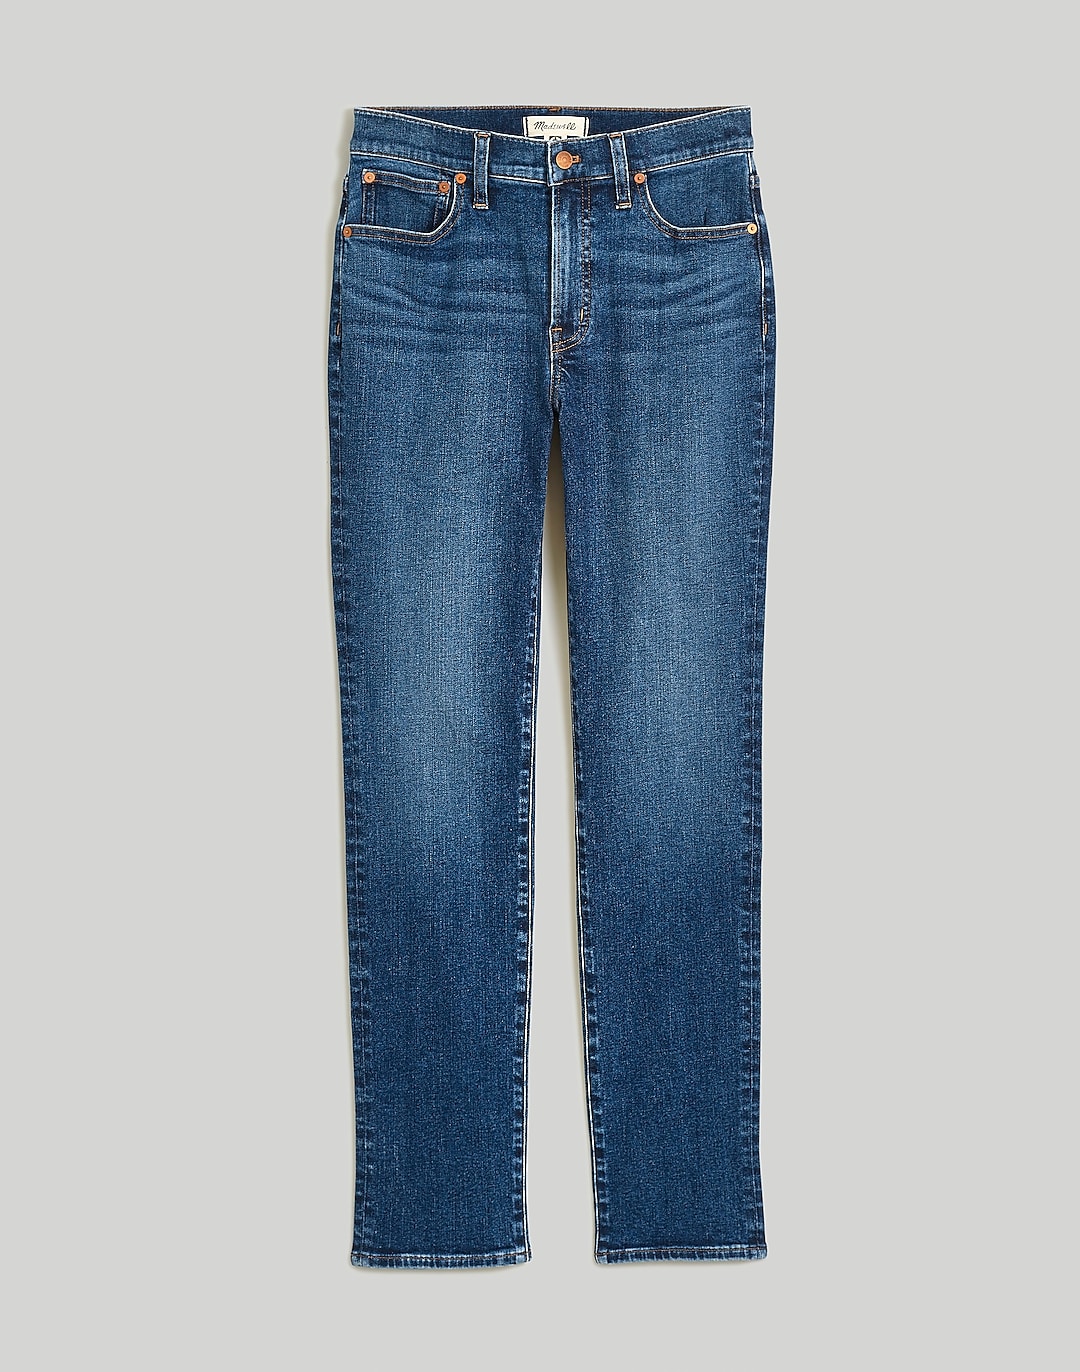 The Mid-Rise Perfect Vintage Jeans | Madewell